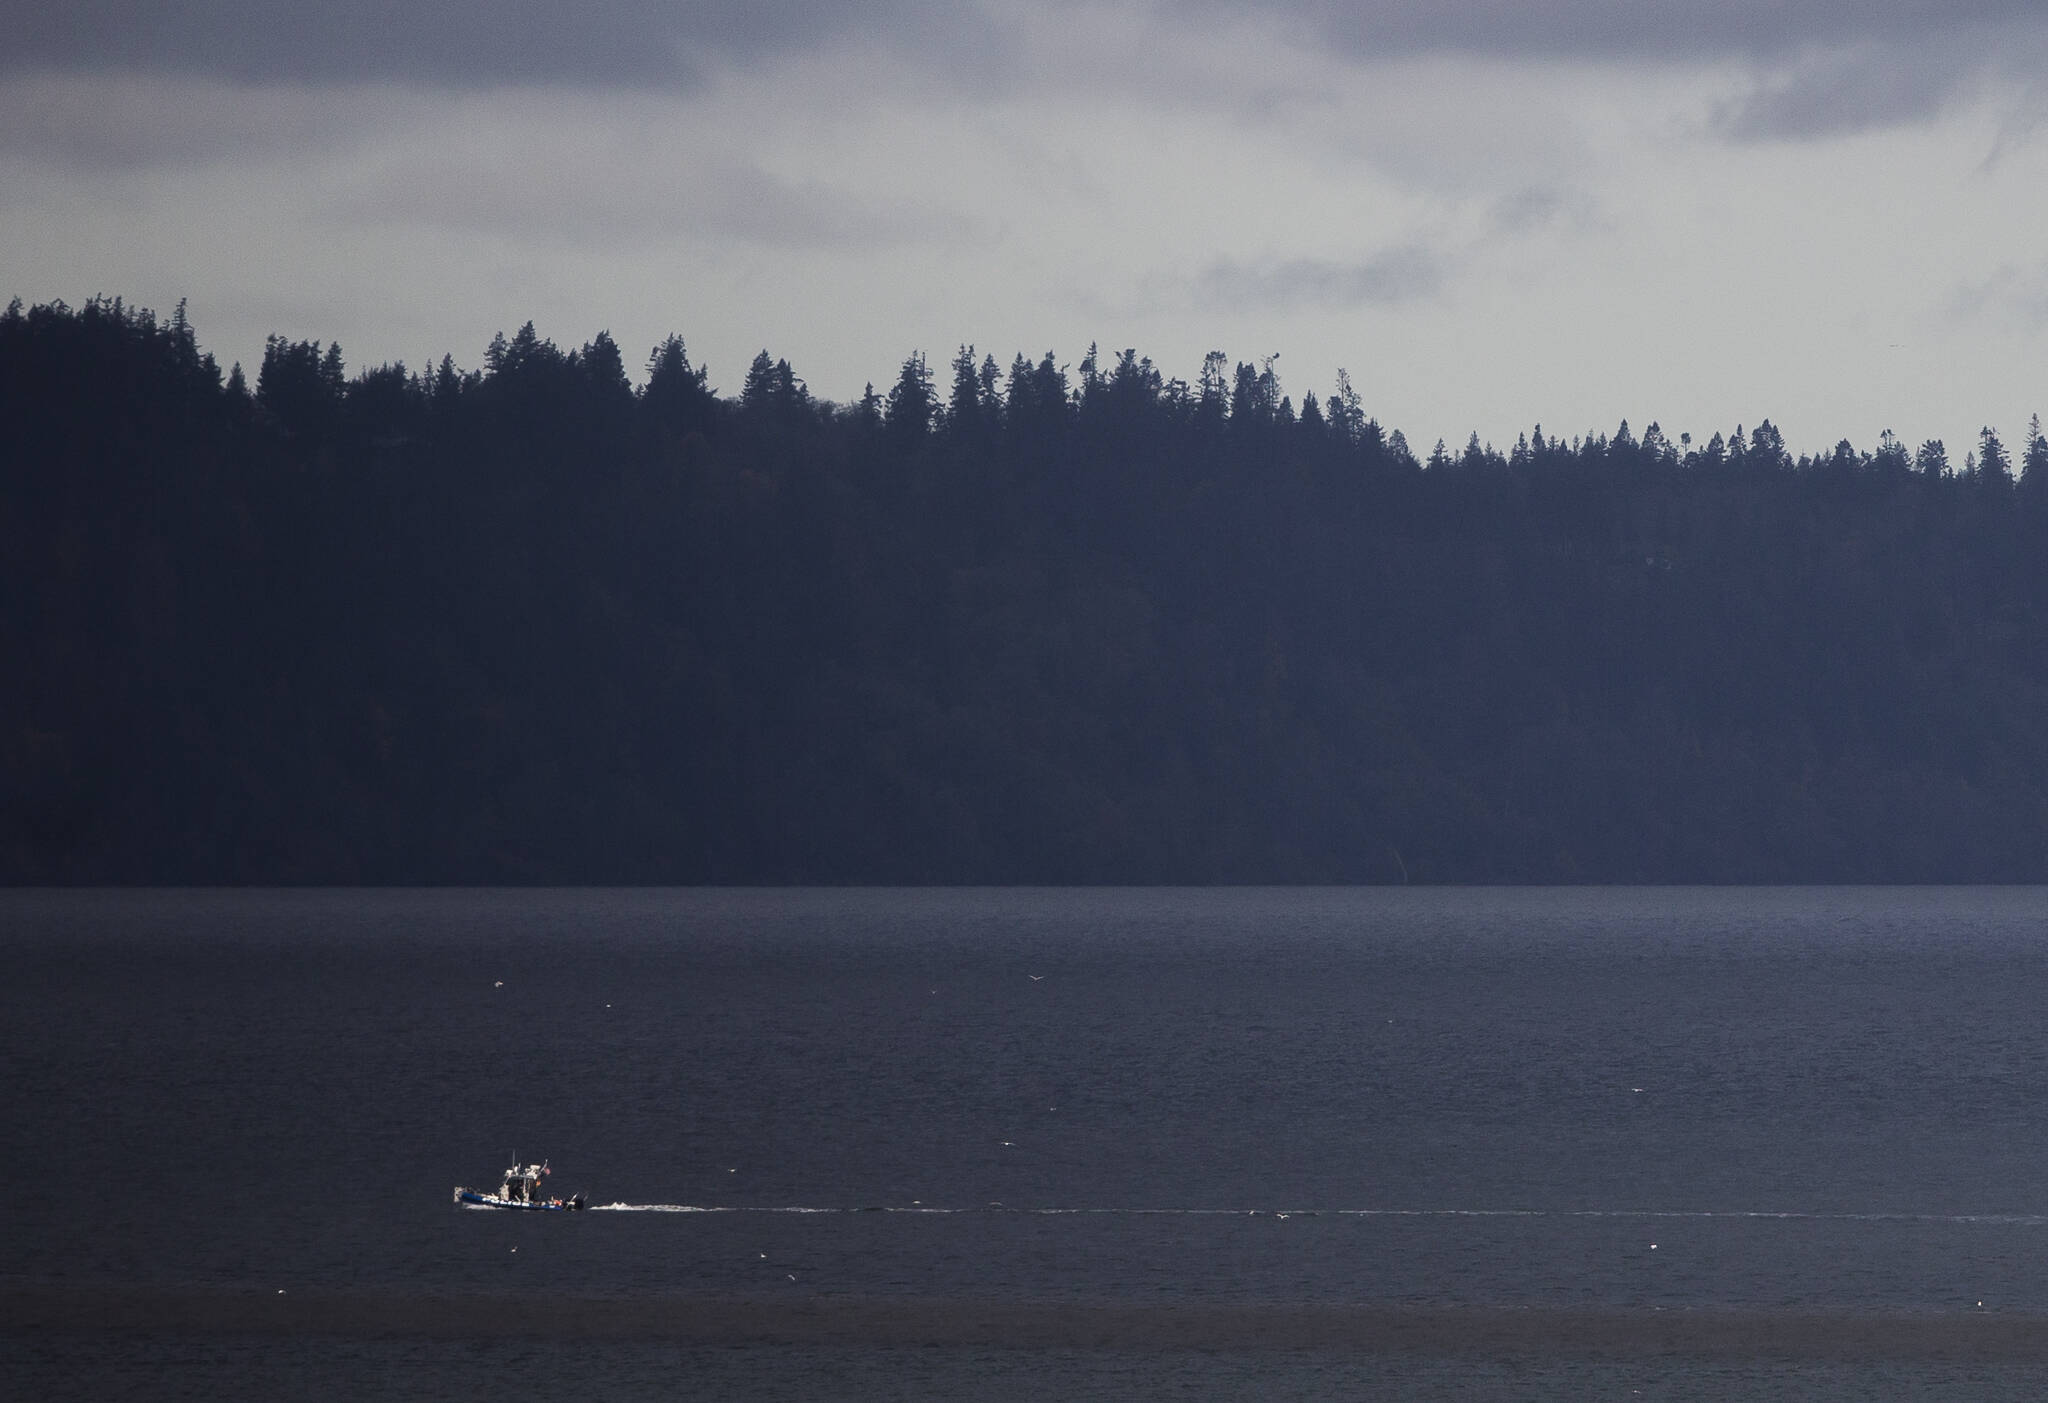 A police boat crosses Possession Sound on Wednesday to Hat Island, where the body of a man was found in Puget Sound. A kayaker was reported missing on Tuesday. (Olivia Vanni / The Herald)